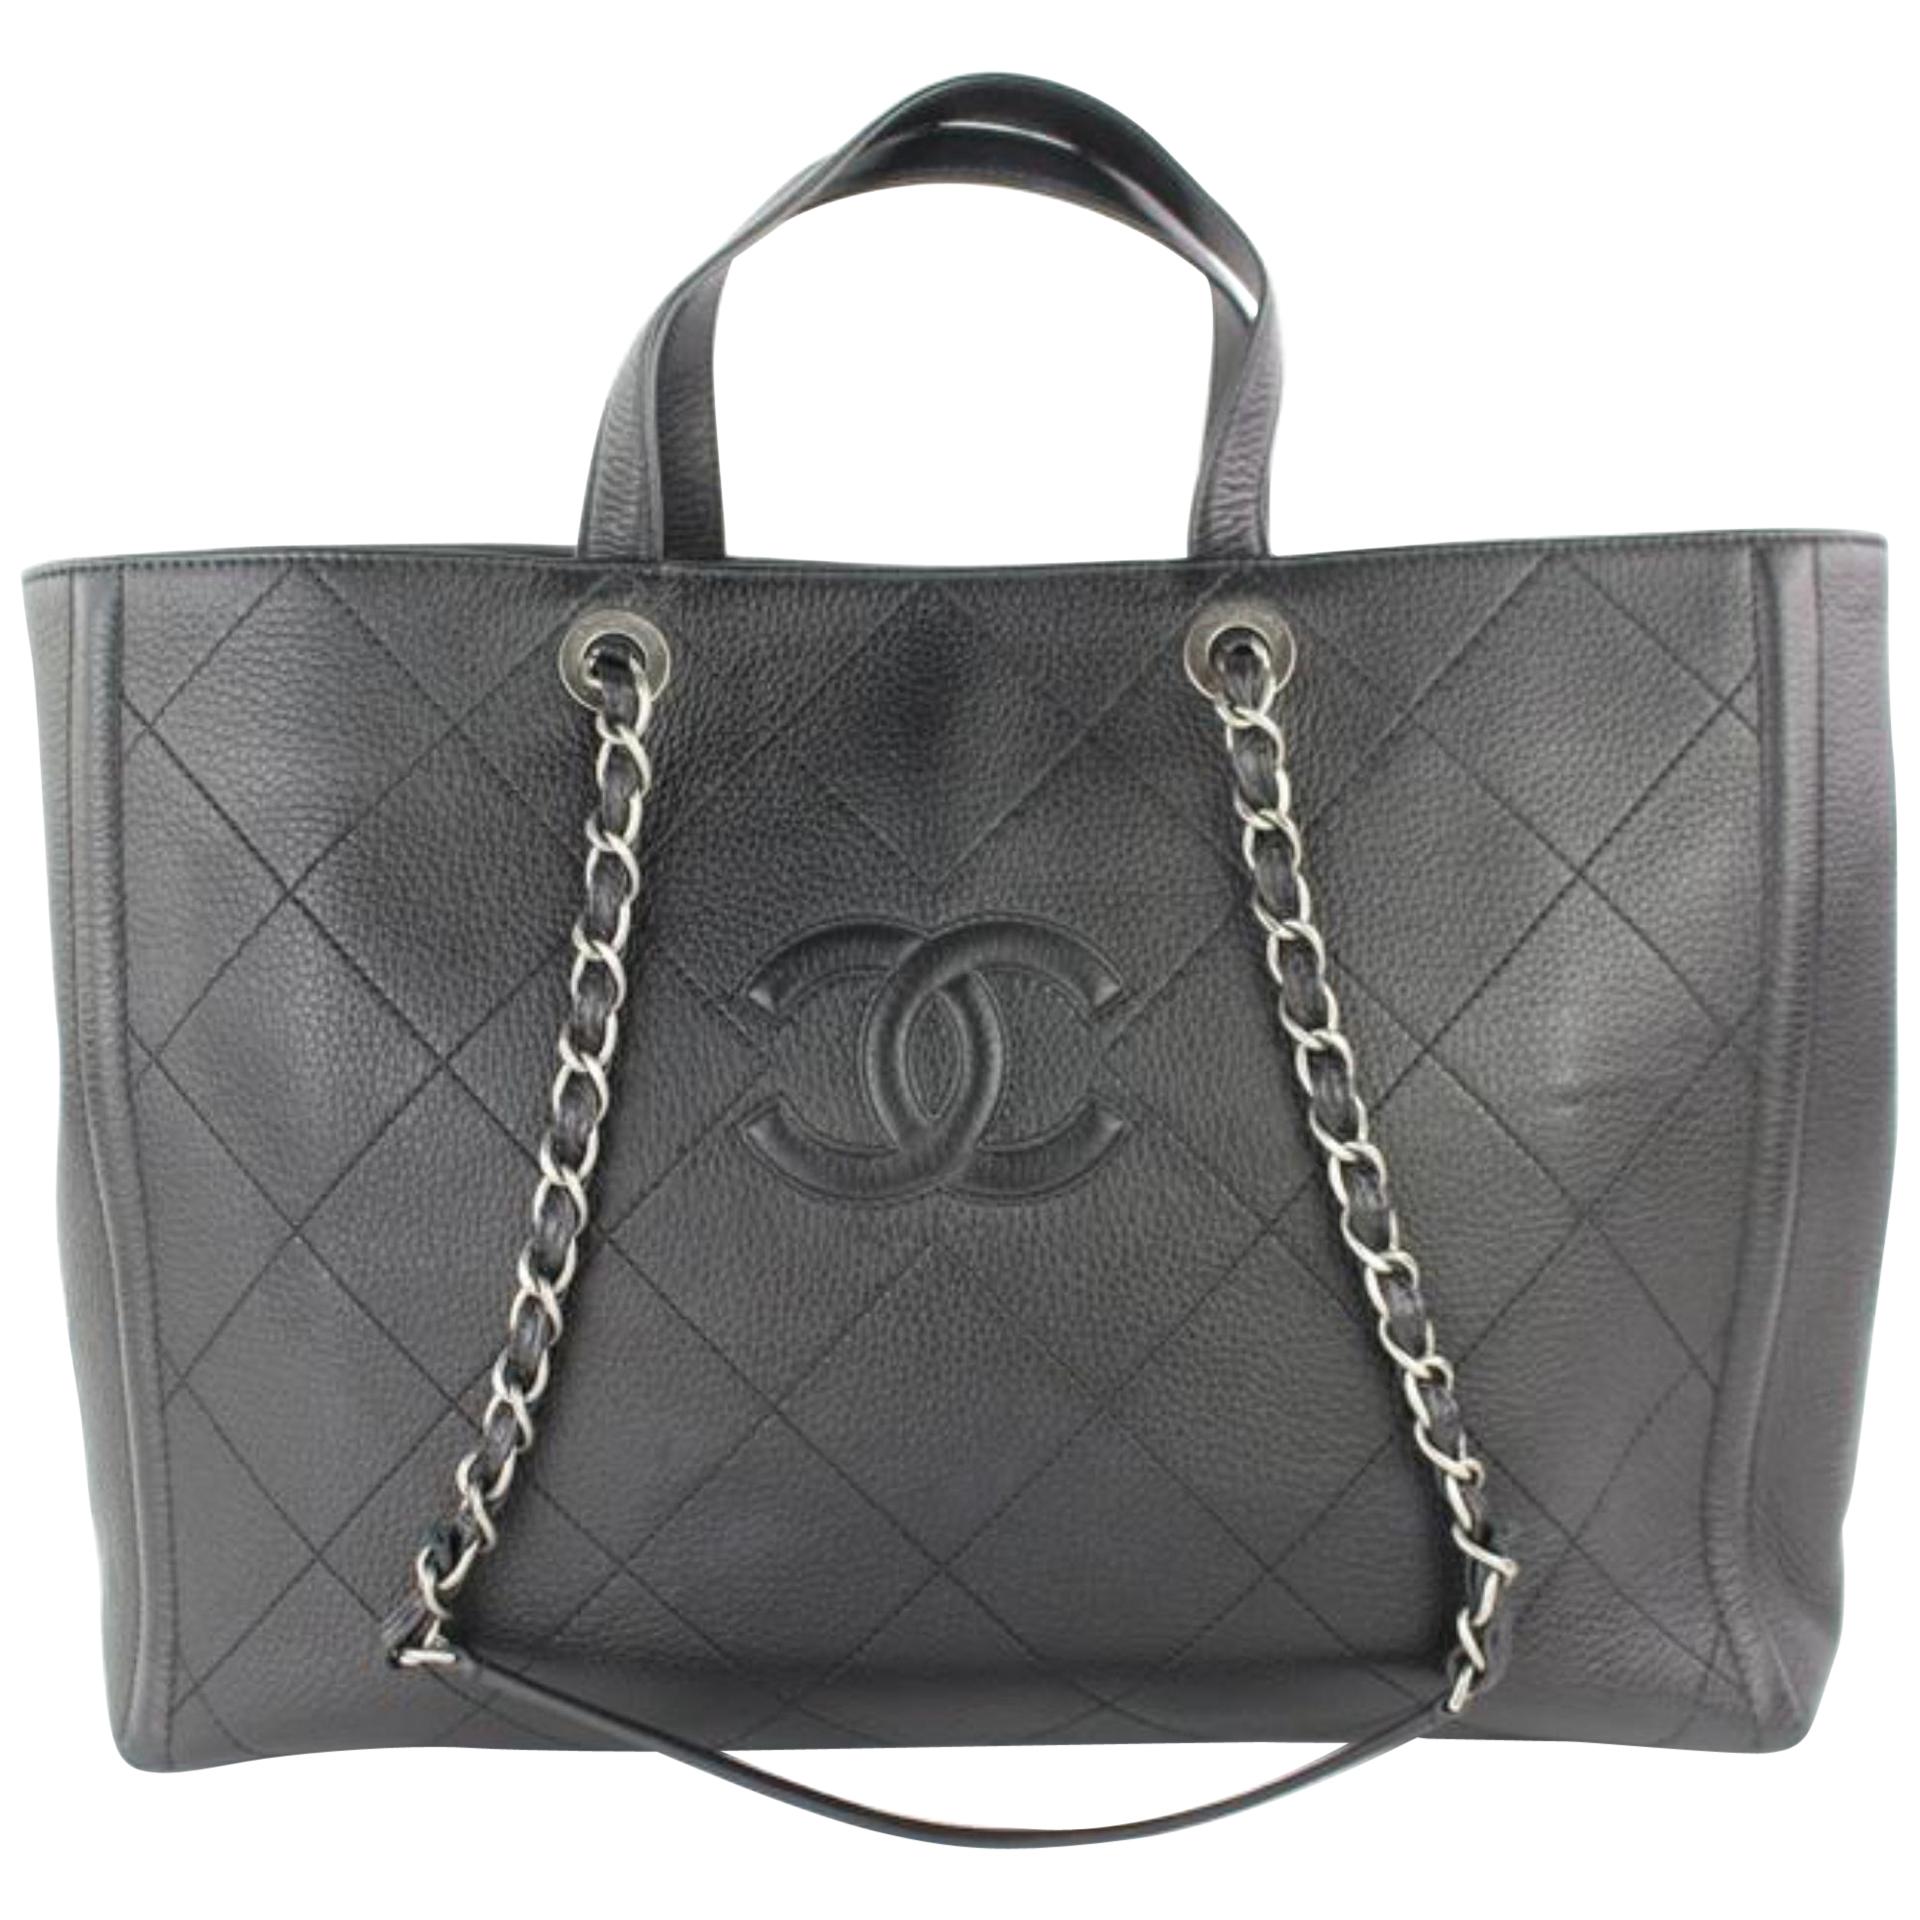 Chanel Quilted Caviar 2way Shopper Tote 3cz0116 Black Leather Shoulder Bag For Sale